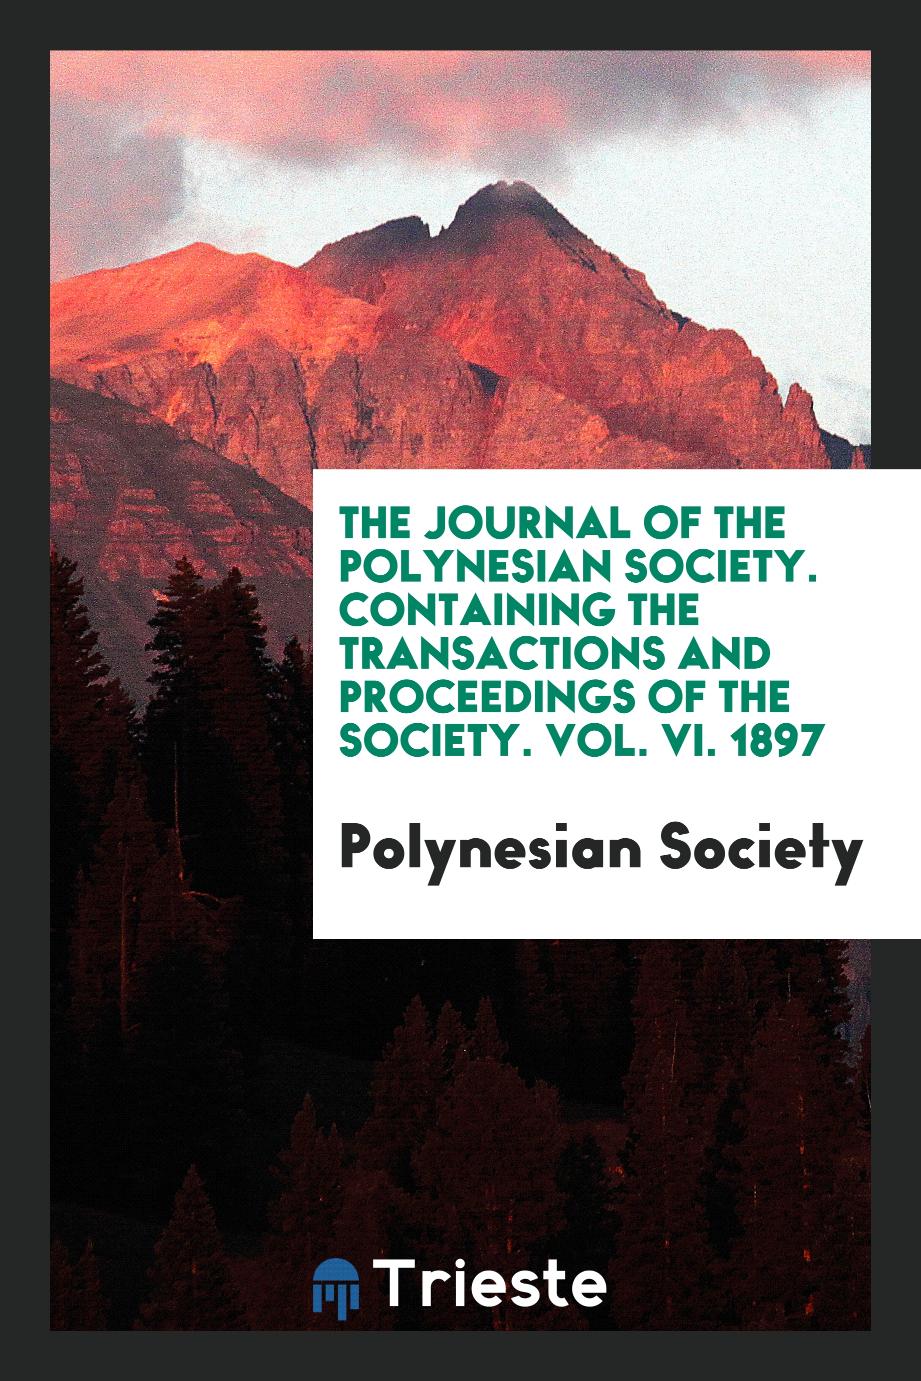 The Journal of the Polynesian Society. Containing the Transactions and Proceedings of the Society. Vol. VI. 1897